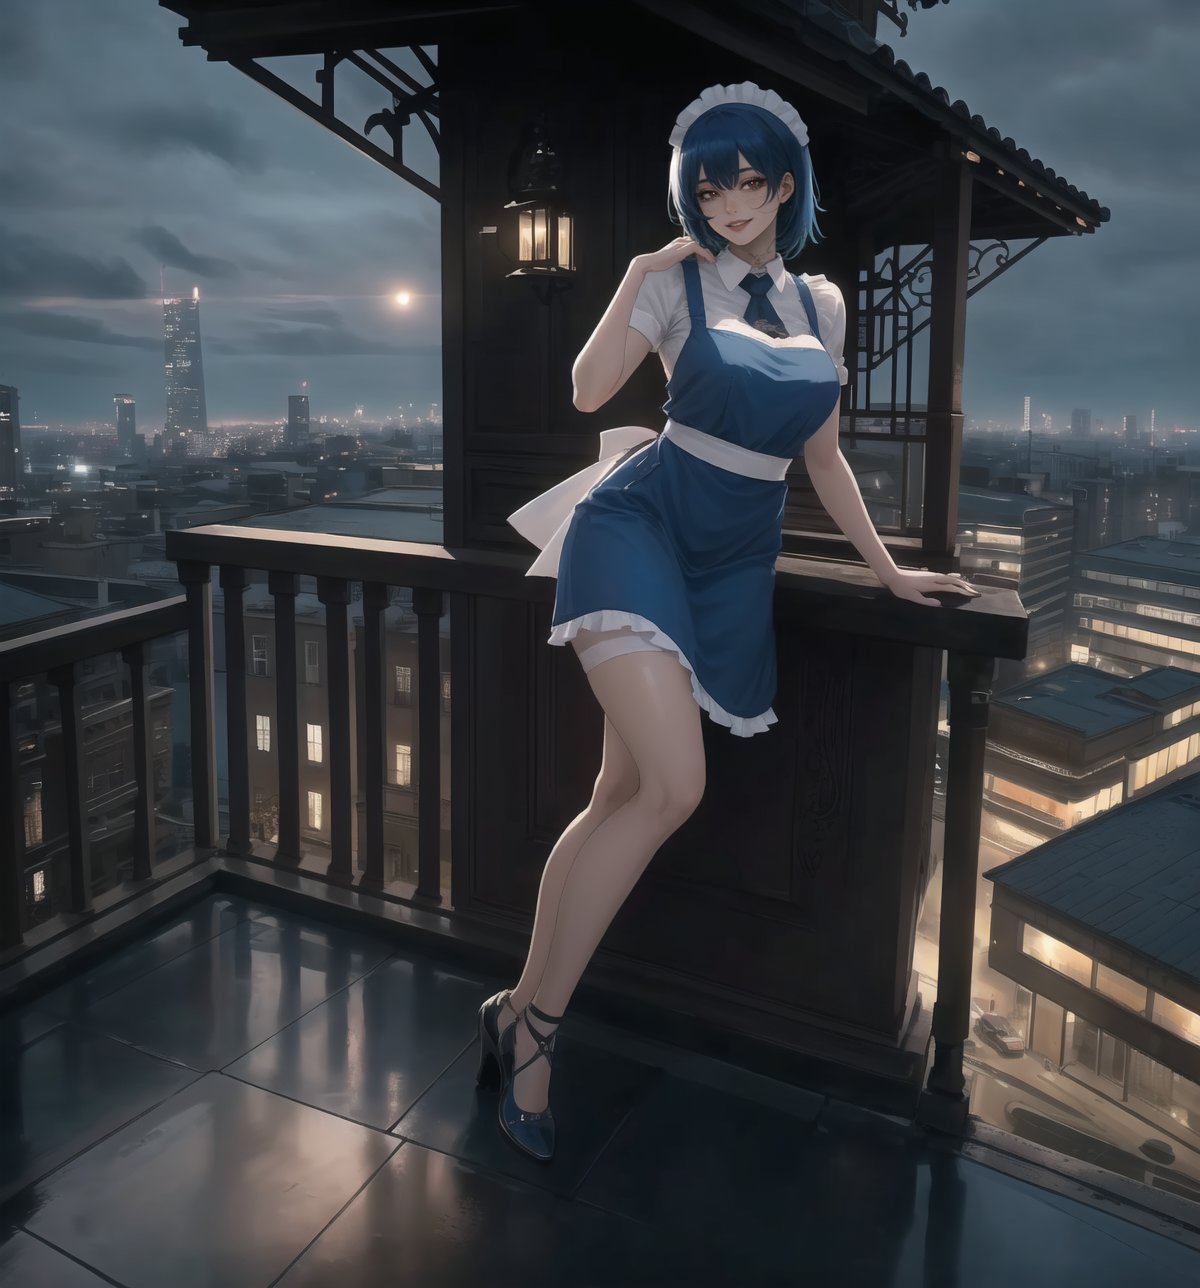 A masterpiece of urban art with a realistic style and graphic details. | Miyuki, a 23-year-old woman, is dressed in a maid's outfit, consisting of a blue dress with a white apron, white stockings, and black low-heeled shoes. She also wears a white headscarf, which gives her an air of innocence and purity. Her blue hair is long and straight, with a modern and stylish cut. Her red eyes are looking at the viewer, smiling and showing her white teeth. She is on a building balcony, overlooking the bustling city below. | The image highlights Miyuki's imposing figure and the architectural elements of the balcony and the building. The concrete and glass structures, along with Miyuki, create an urban and seductive atmosphere. The artificial lighting of the city illuminates the scene, creating dramatic shadows and emphasizing the details of the scene. | Soft and dark lighting effects create a relaxing and mysterious atmosphere, while rough and detailed textures on the structures and outfit add realism to the image. | A relaxing and attractive scene of a beautiful woman on a building balcony, combining elements of urban art and modern architecture. | (((((The image reveals a full-body shot as she assumes a sensual pose, engagingly leaning against a structure within the scene in an exciting manner. She takes on a sensual pose as she interacts, boldly leaning on a structure, leaning back in an exciting way.))))). | ((full-body shot)), ((perfect pose)), ((perfect fingers, better hands, perfect hands)), ((perfect legs, perfect feet)), ((perfect design)), ((perfect composition)), ((very detailed scene, very detailed background, perfect layout, correct imperfections)), More Detail, Enhance, 